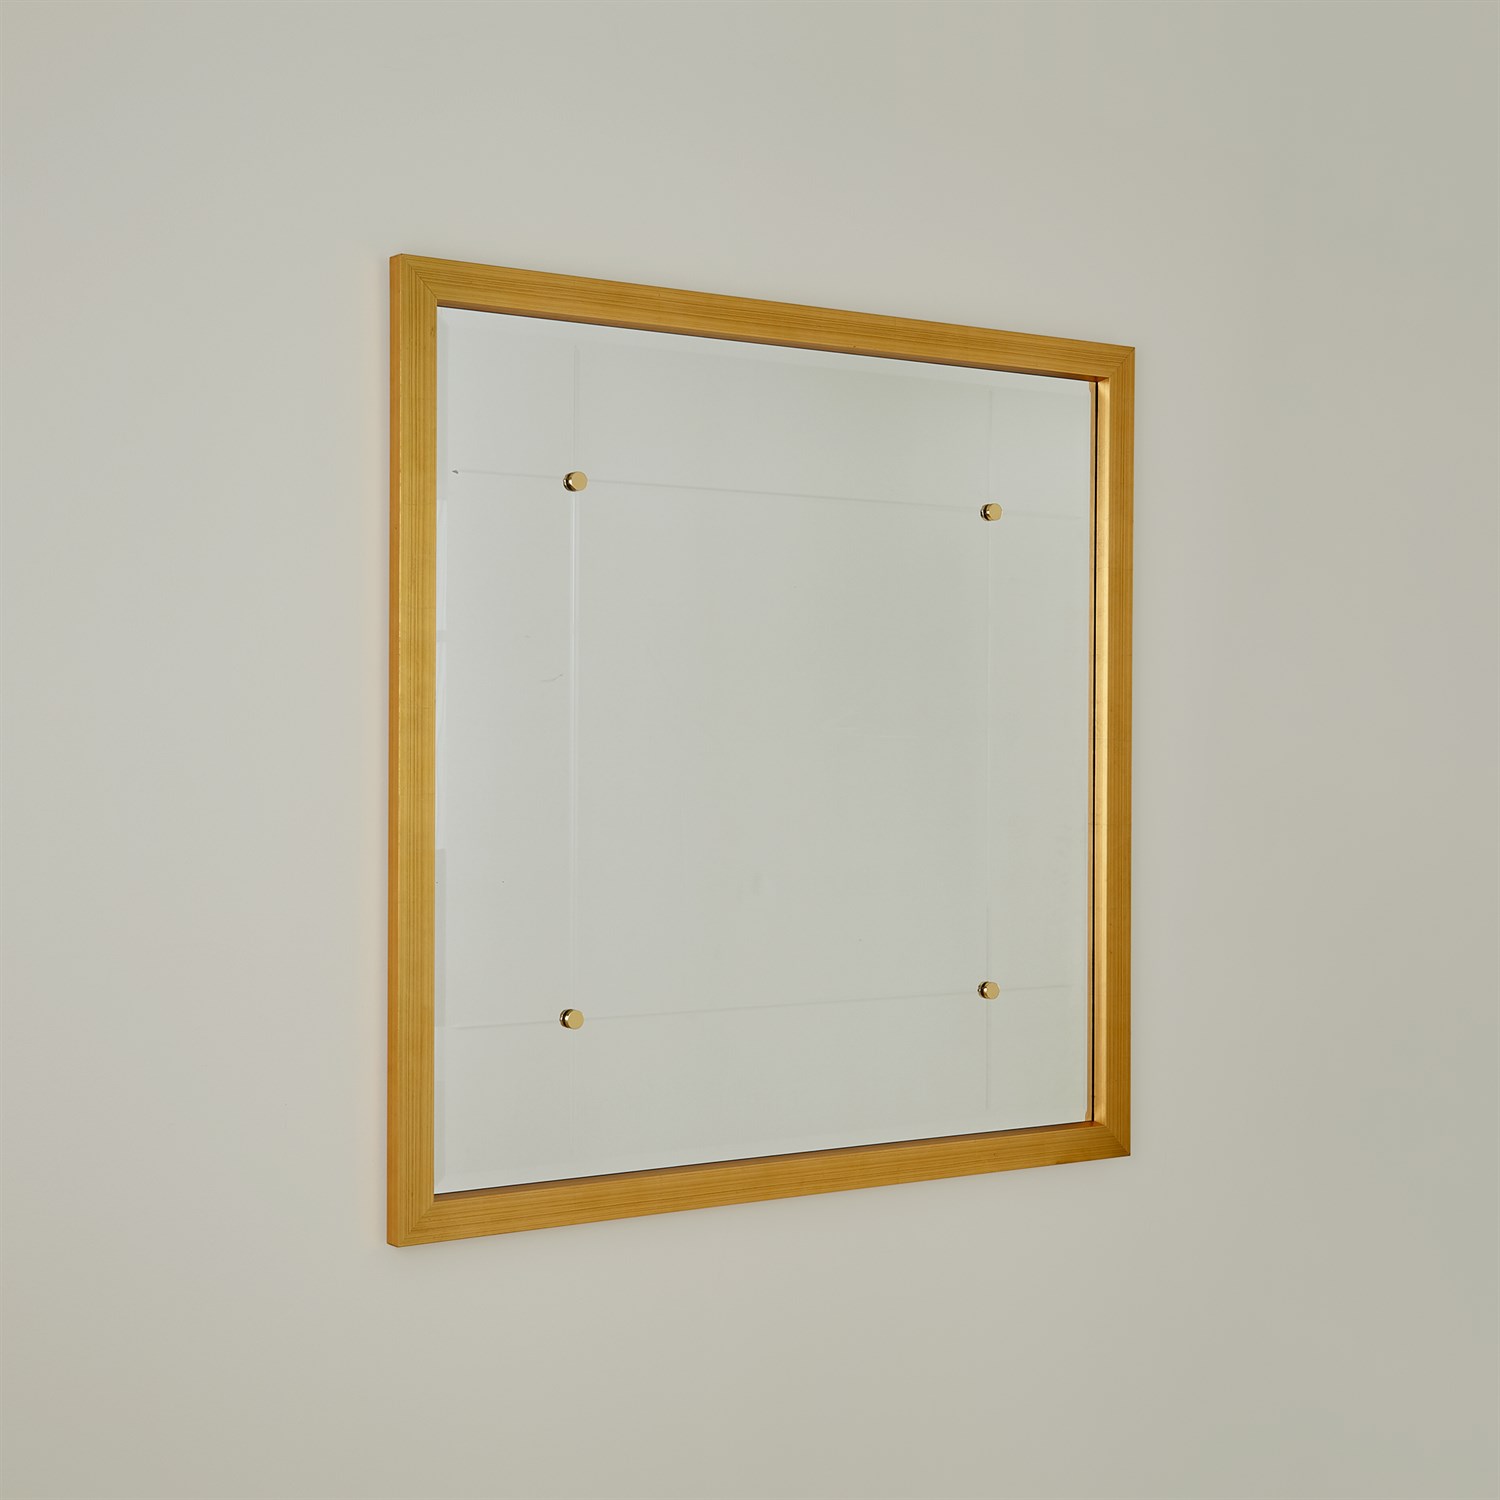 BEAUMONT SQUARE MIRROR-GOLD LEAF